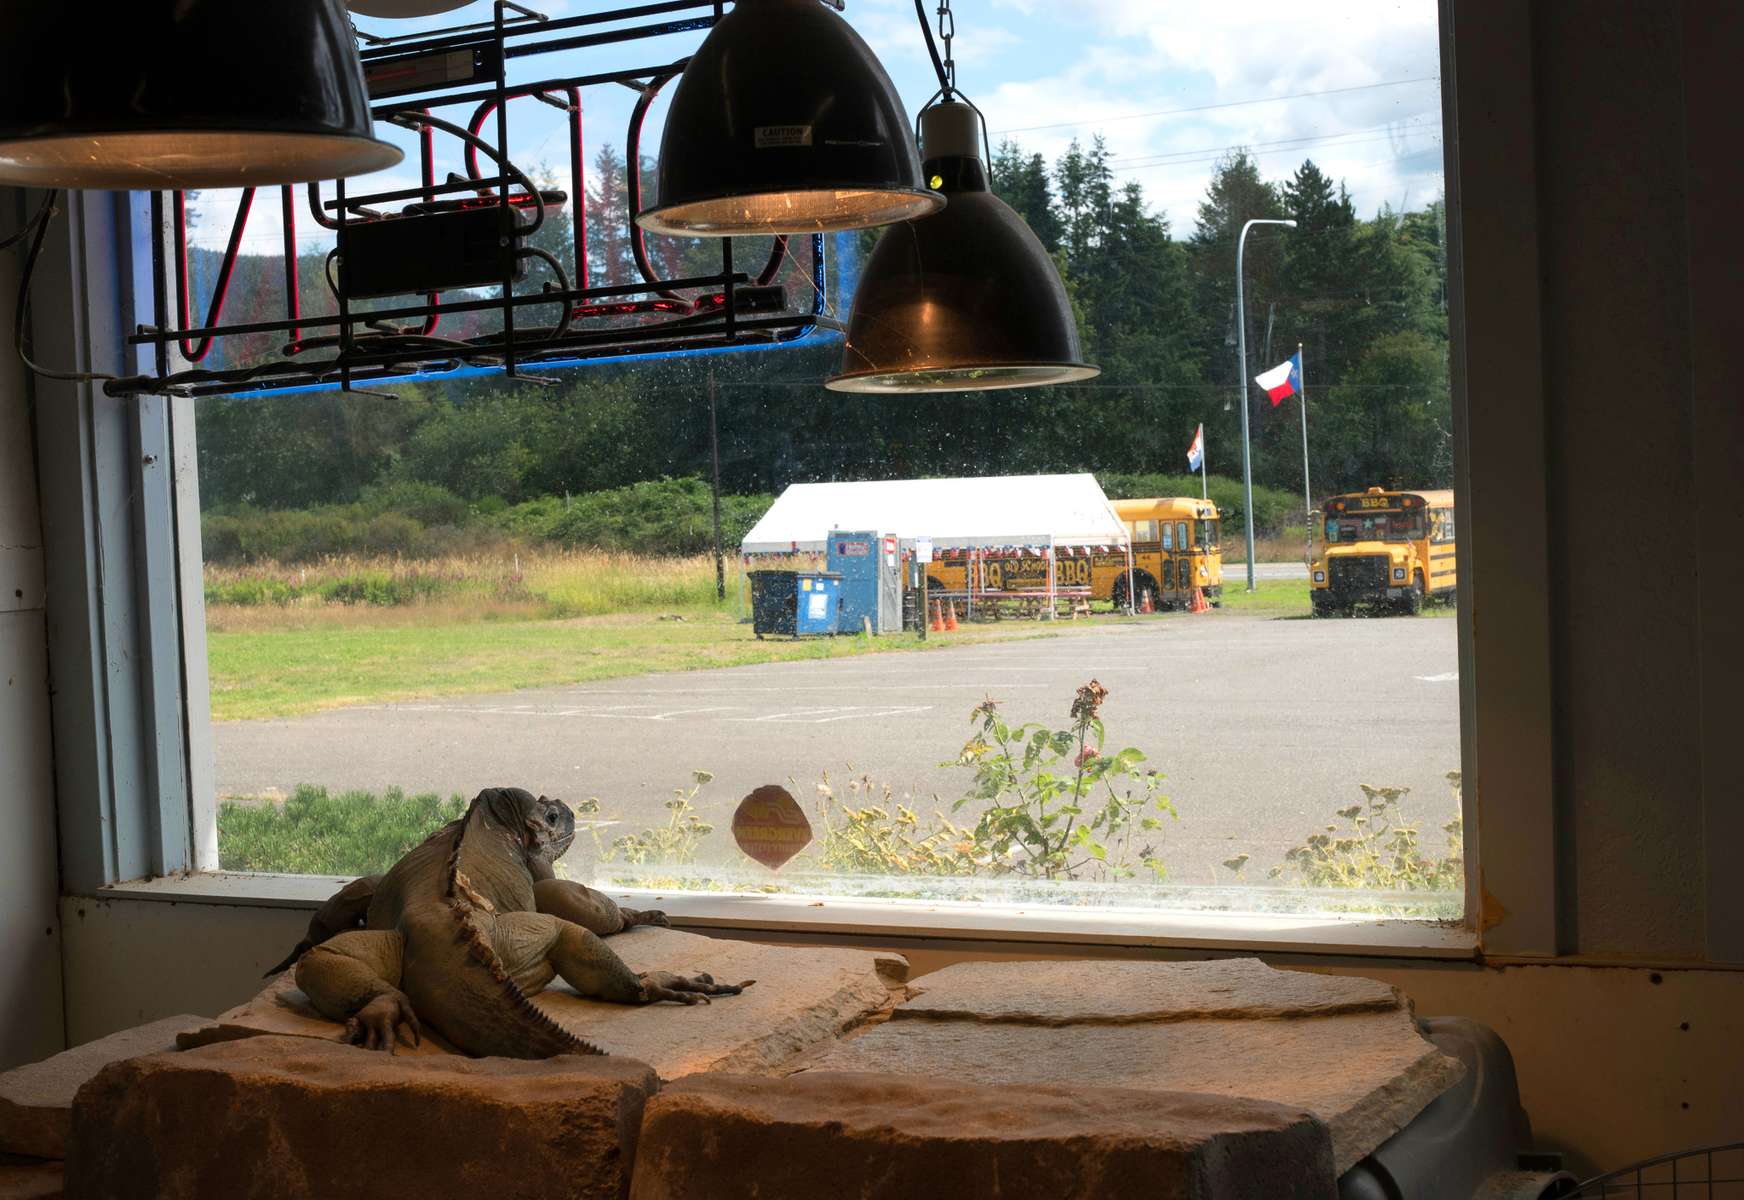 A Rhino Iguana named {quote}Doc{quote} stares out the window of it's enclosure towards a parking lot at the Reptile Zoo in Monroe, Wash. on July 13, 2016. A sign posted on its enclosure said rhino iguanas come from the {quote}Carribean Island of Hispaniola{quote} and live in {quote}scrub woodlands, dry forests, and rocky habitats.{quote} Another sign says that this species is listed as {quote}VULNERABLE{quote} on the IUCN Red List due to: human persecution, collection for food, importation for captive keeping purposes, and predation by invasive species (especially cats).Another sign mentions these animals were captured in the wild but bred in captivity.